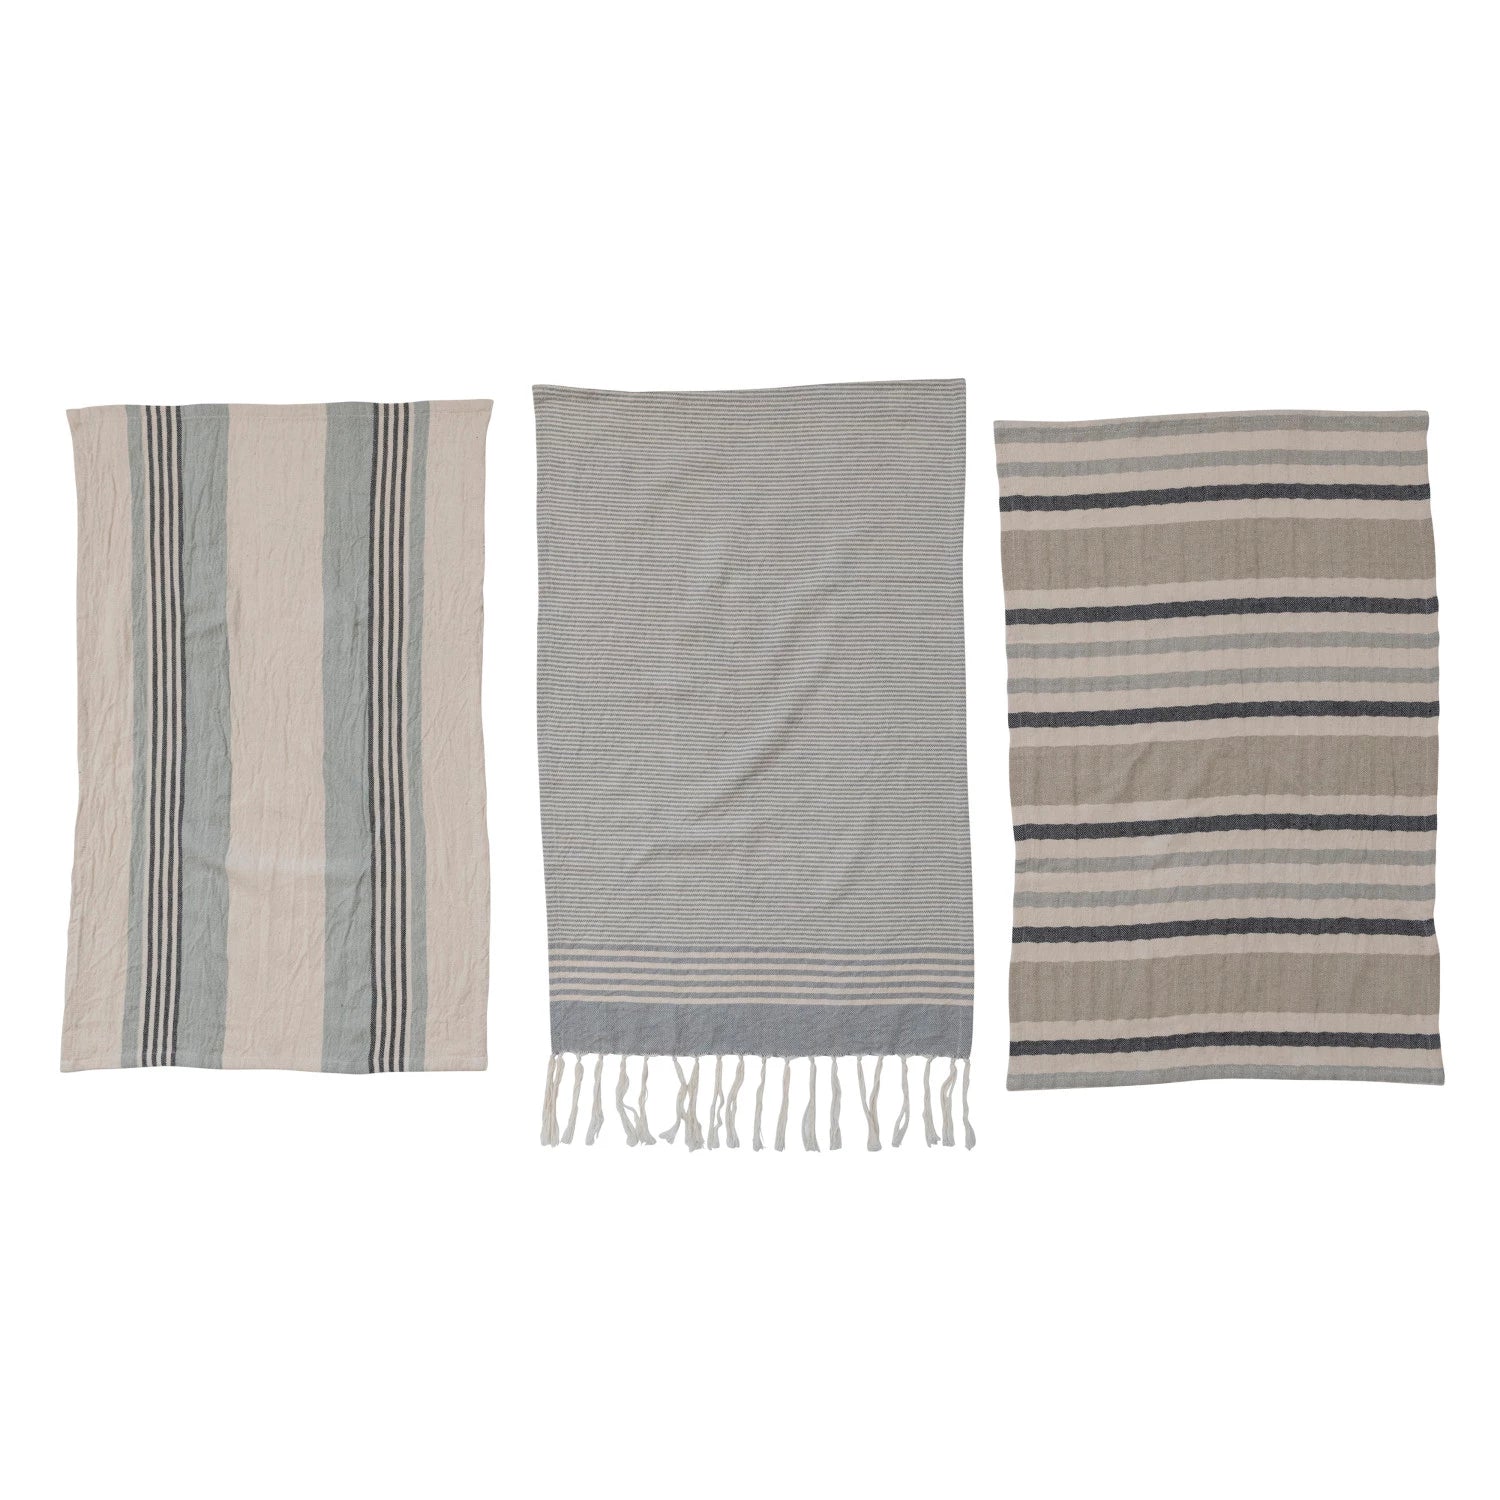 all three styles of woven cotton tea towels with stripes laying open on a white background